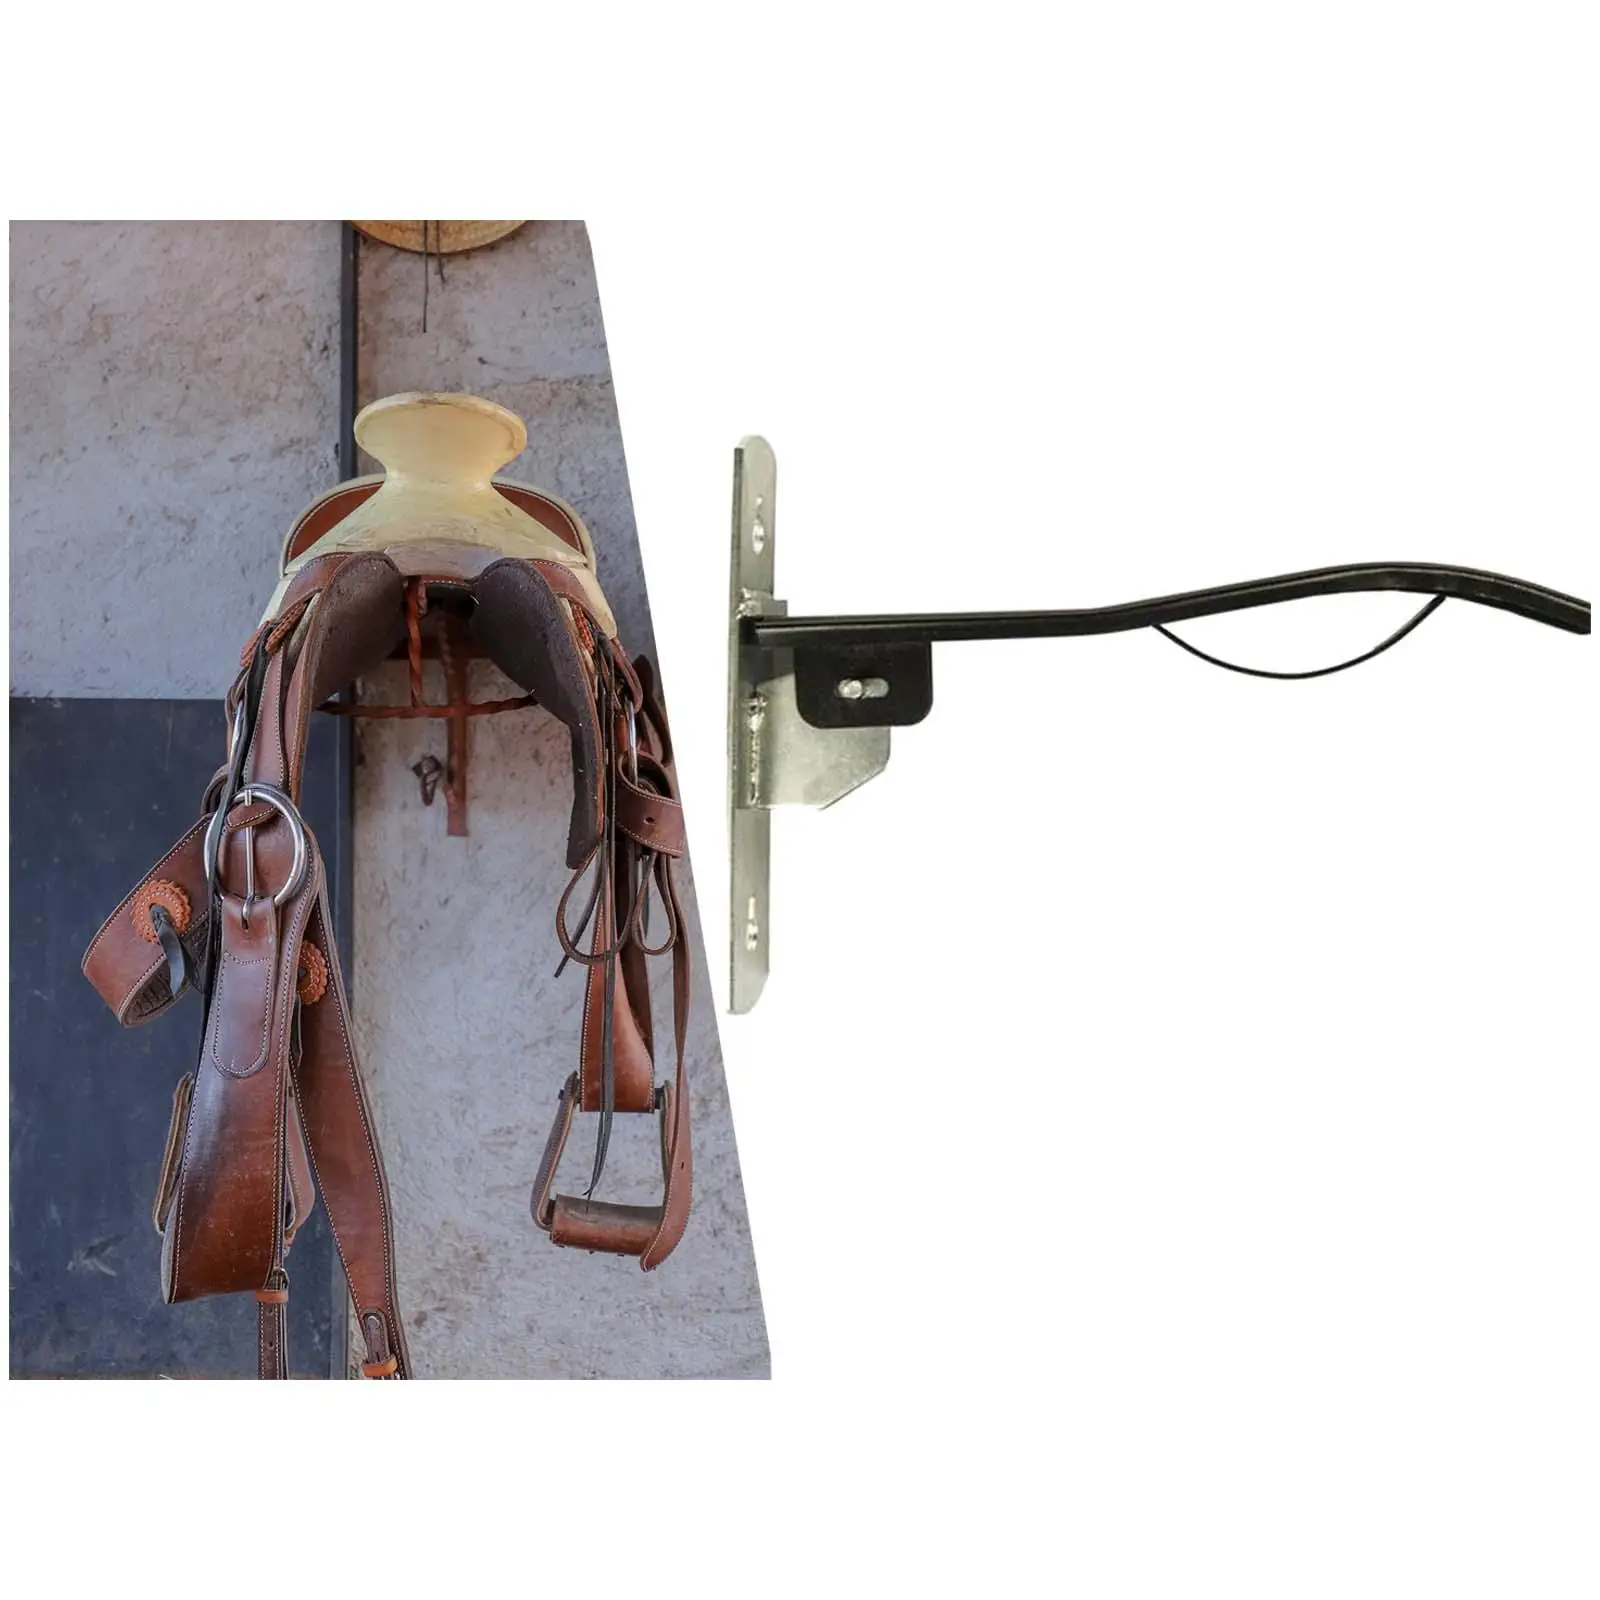 Collapsible Wall Mount Saddle Rack Height 39cm, Width 25cm Painted Metal